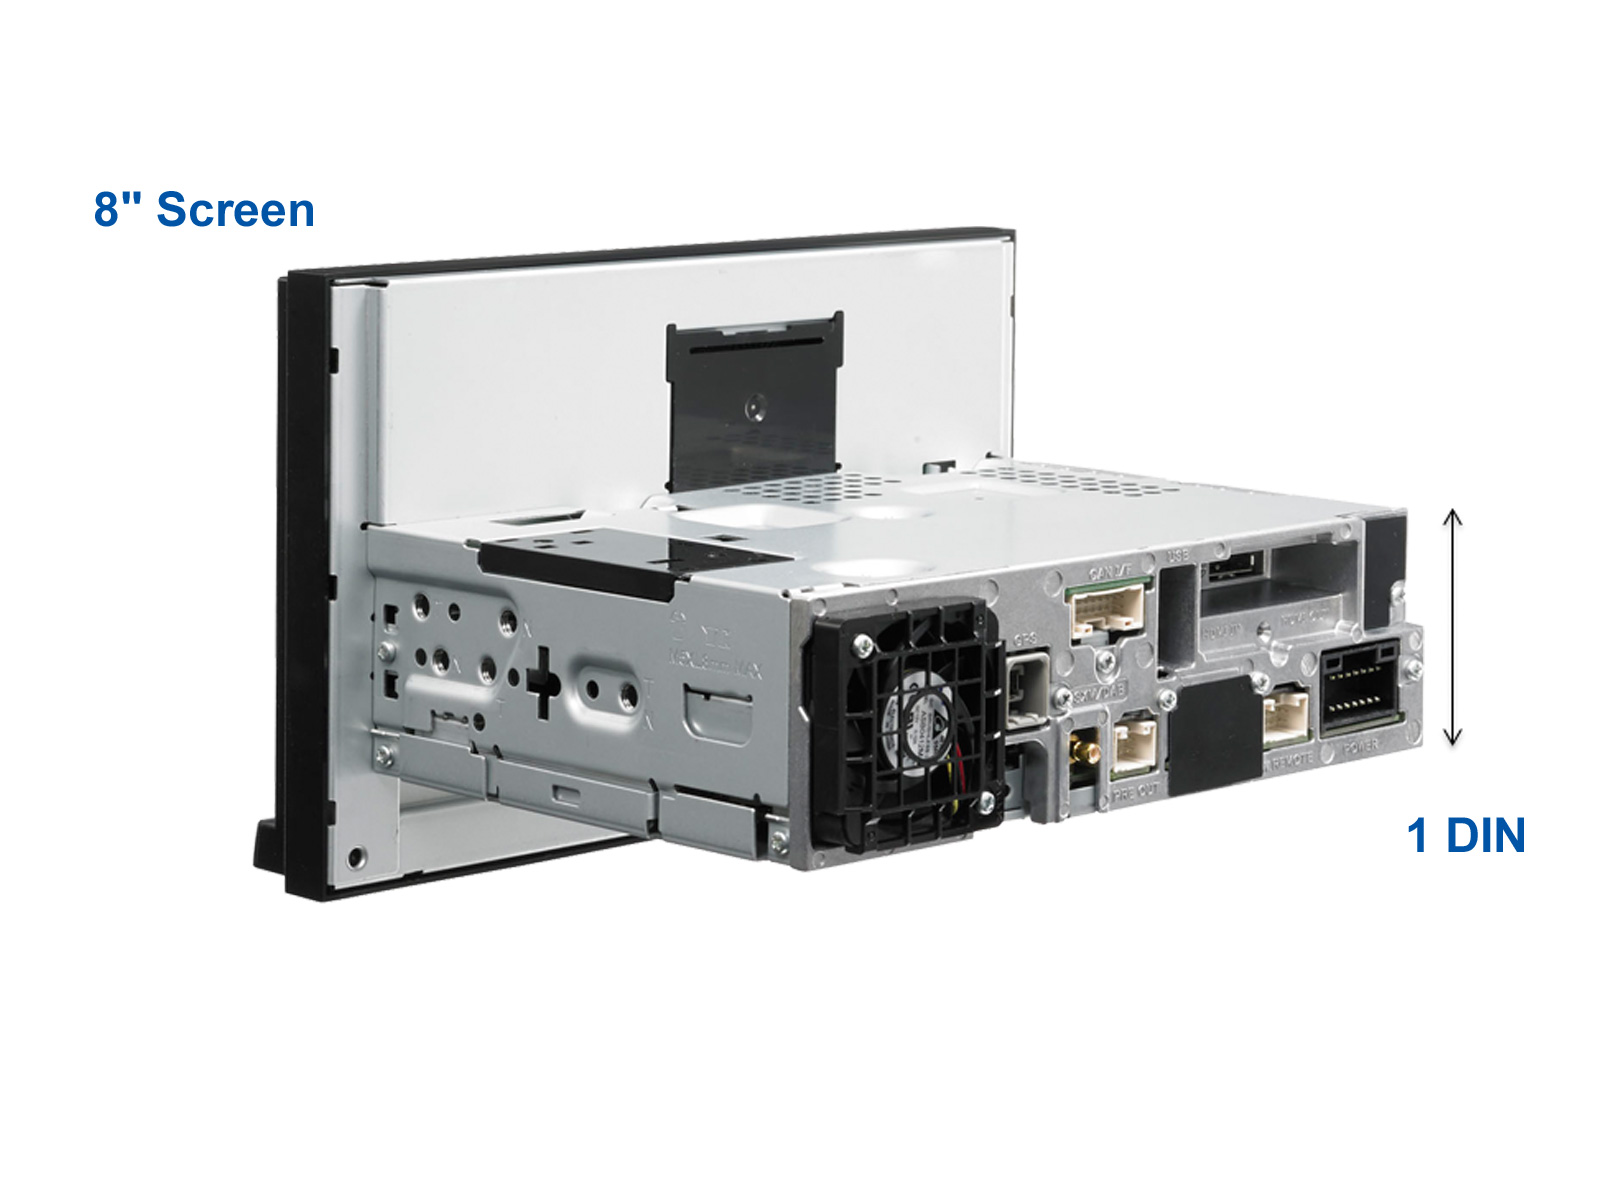 8_Inch_Big_Screen_for_1DIN_Chassis_produ